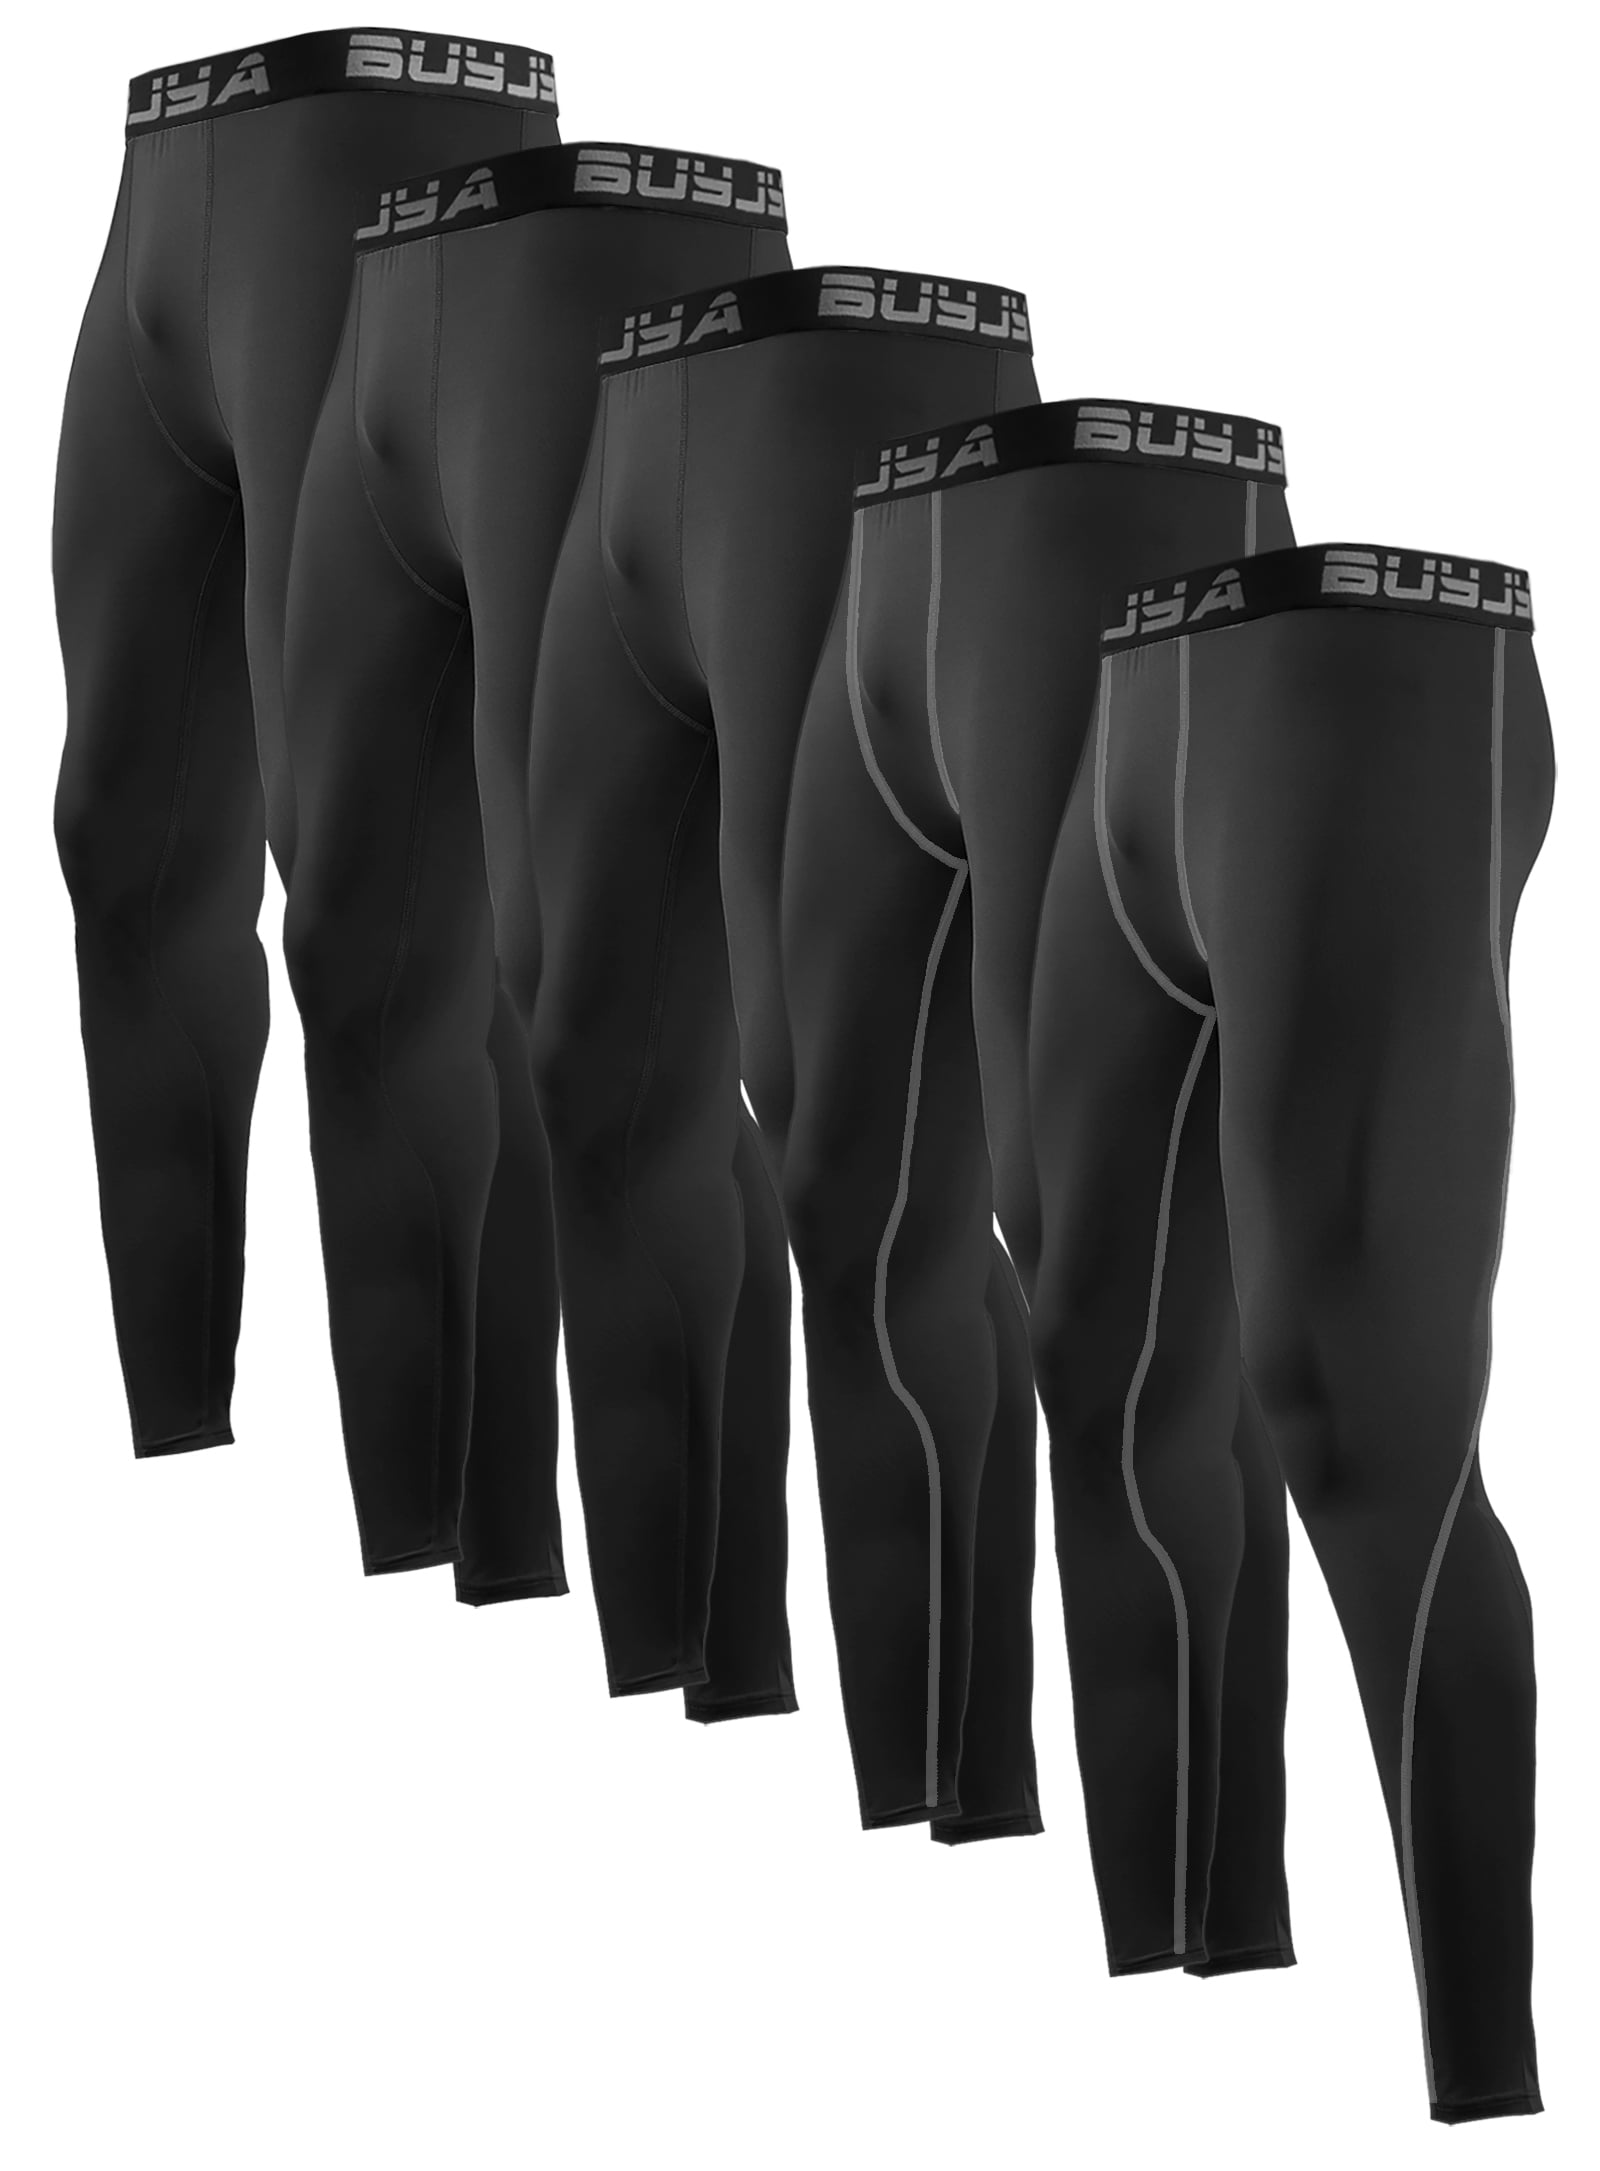 BULLPIANO Boys 2 in 1 Compression Pants Athletic Workout Sports